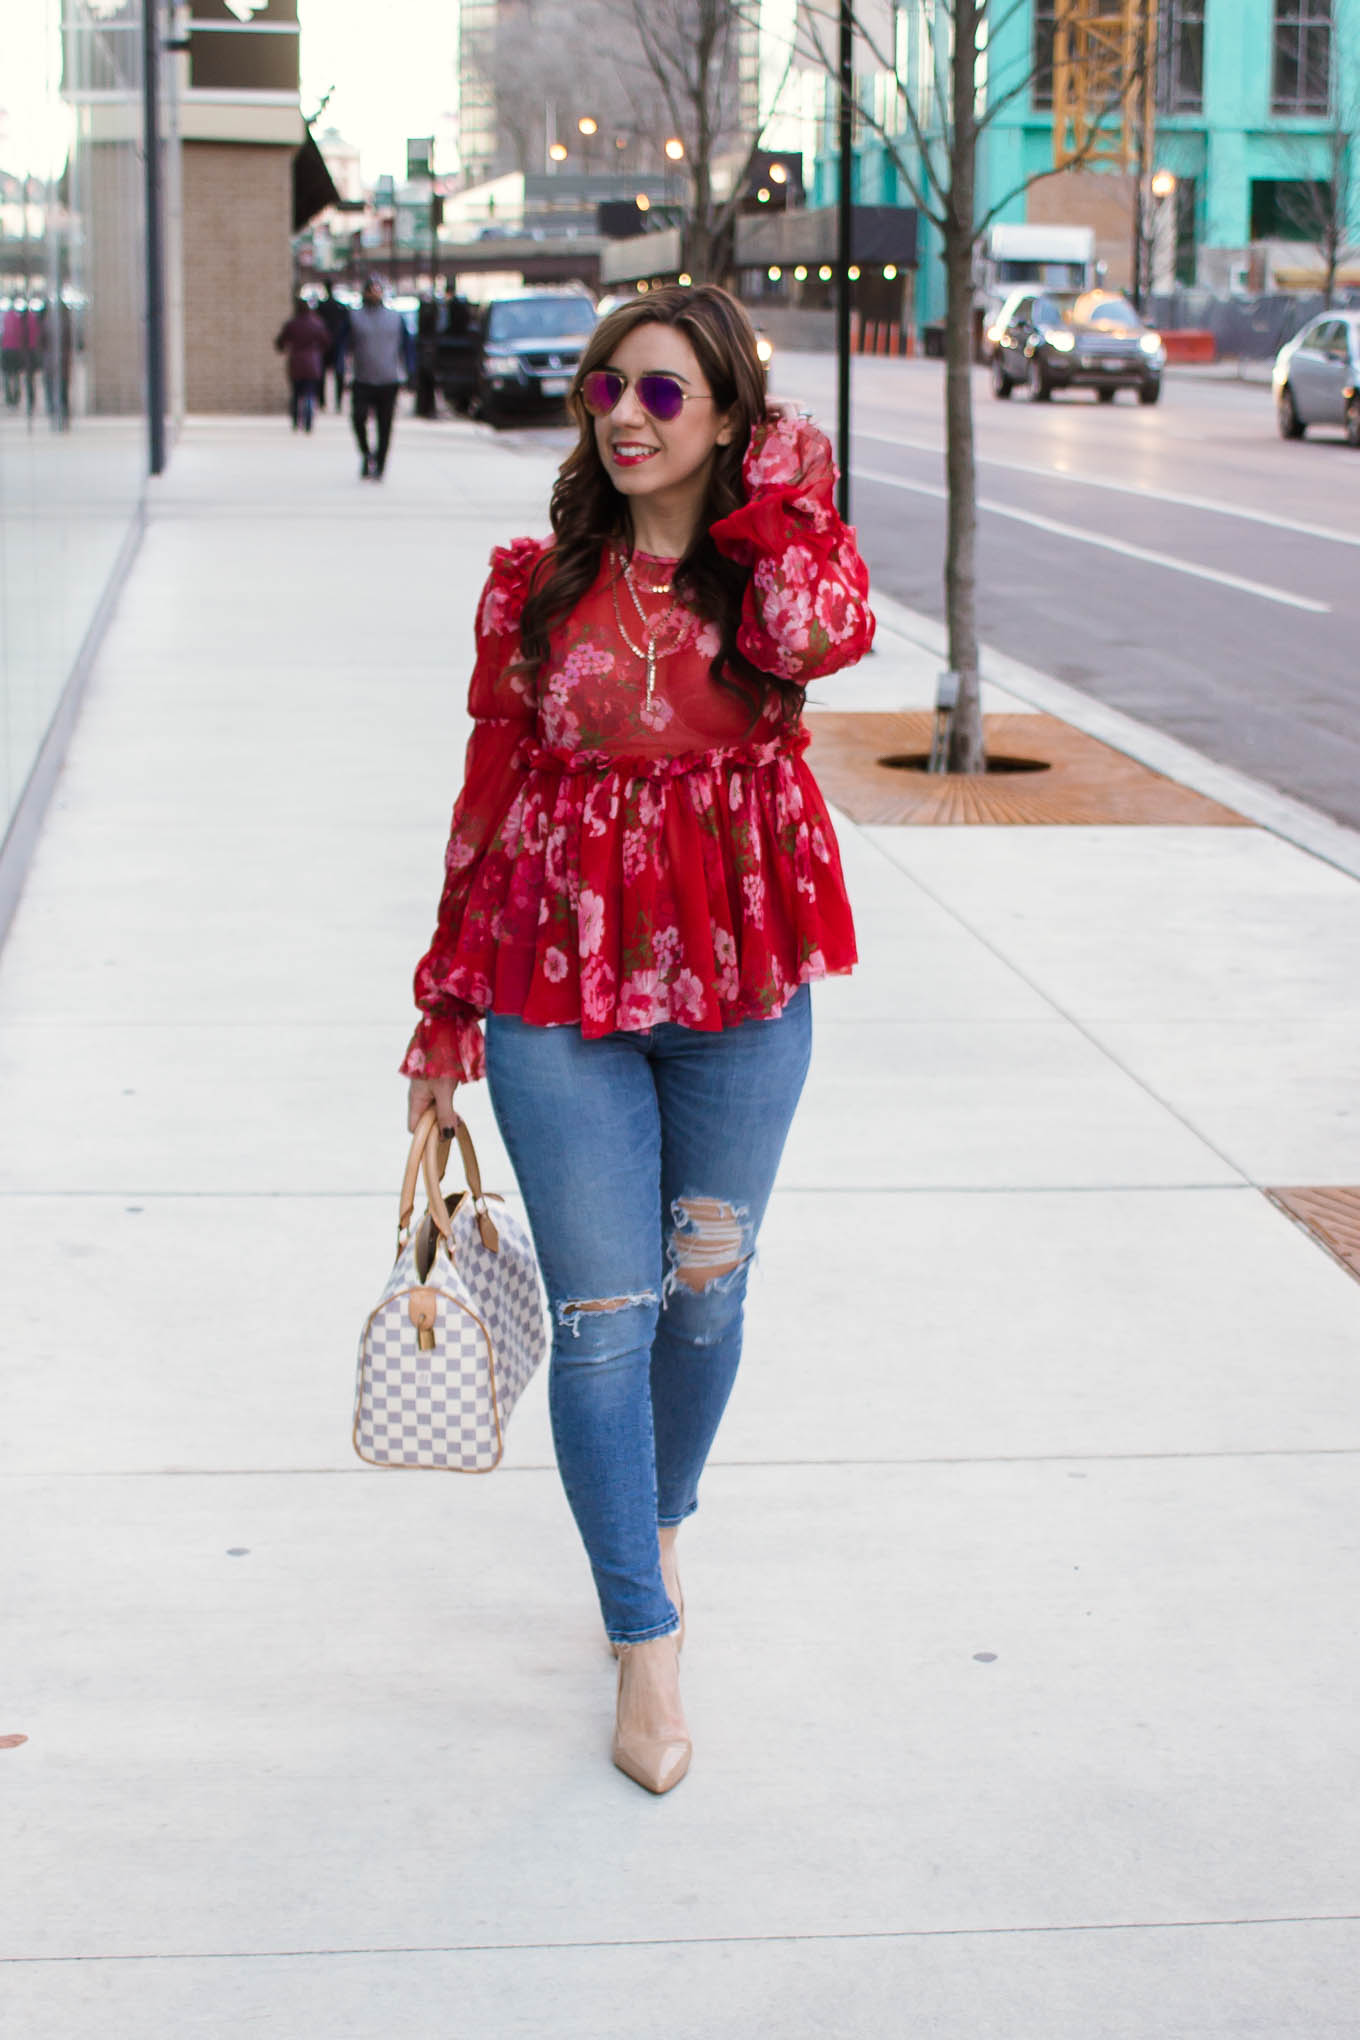 Lifestyle blogger Roxanne of Glass of Glam wearing an Asos ruffle top, Agolde denim, and Sam Edelman pumps